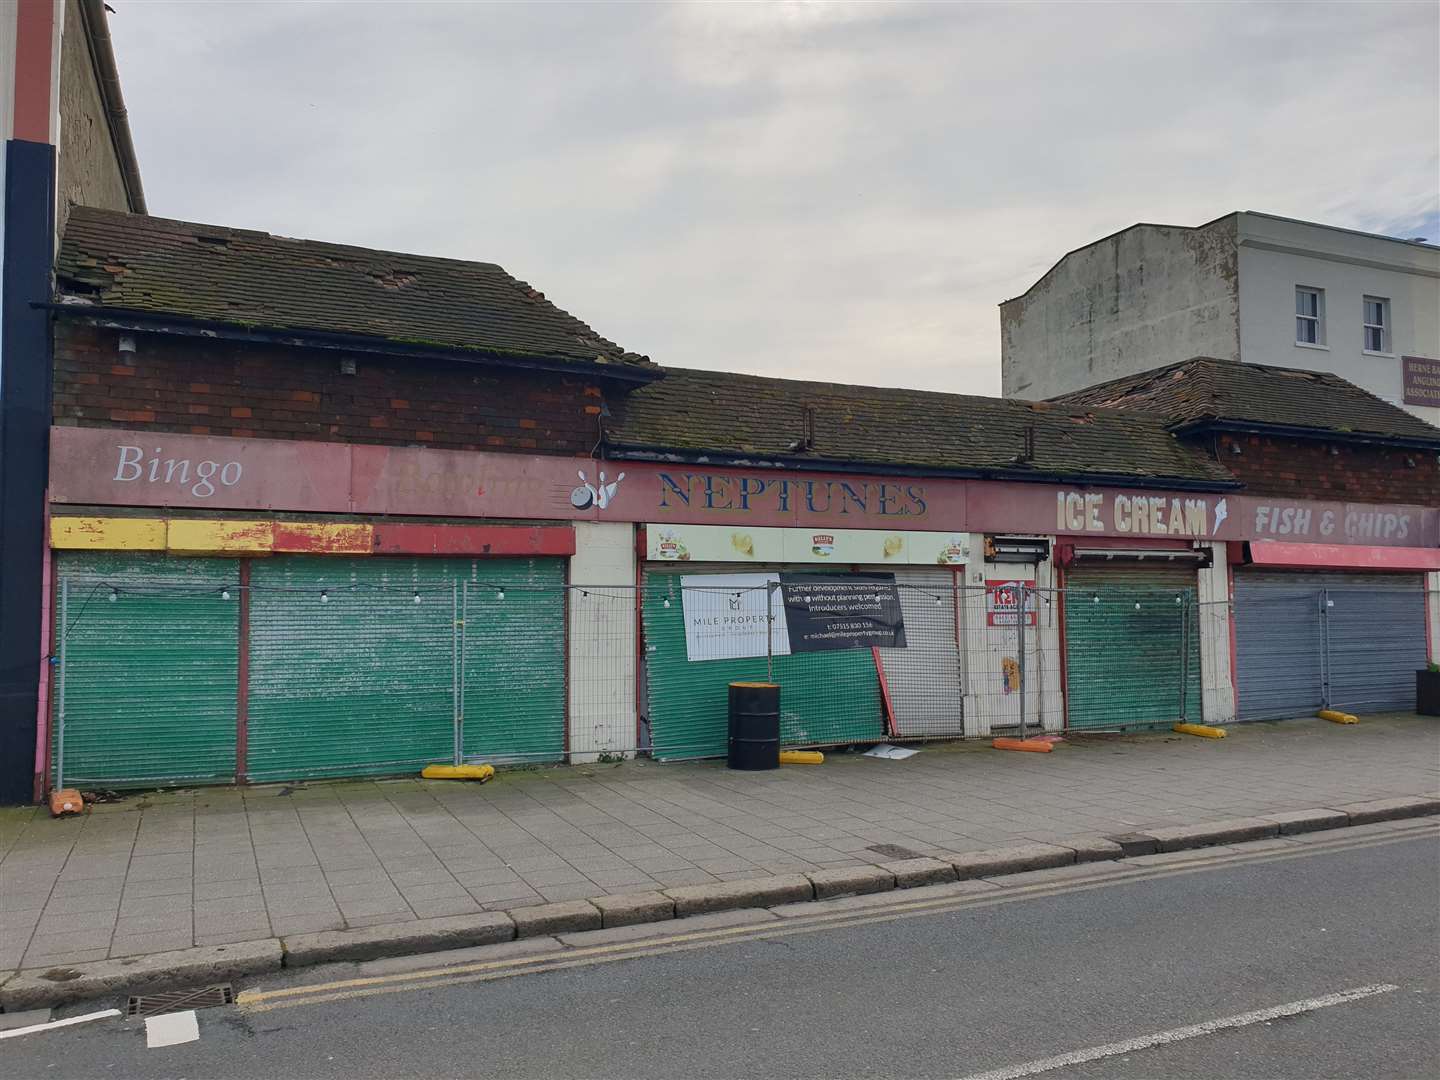 Neptune’s Amusements in Central Parade has been targeted by vandals and fly-tippers